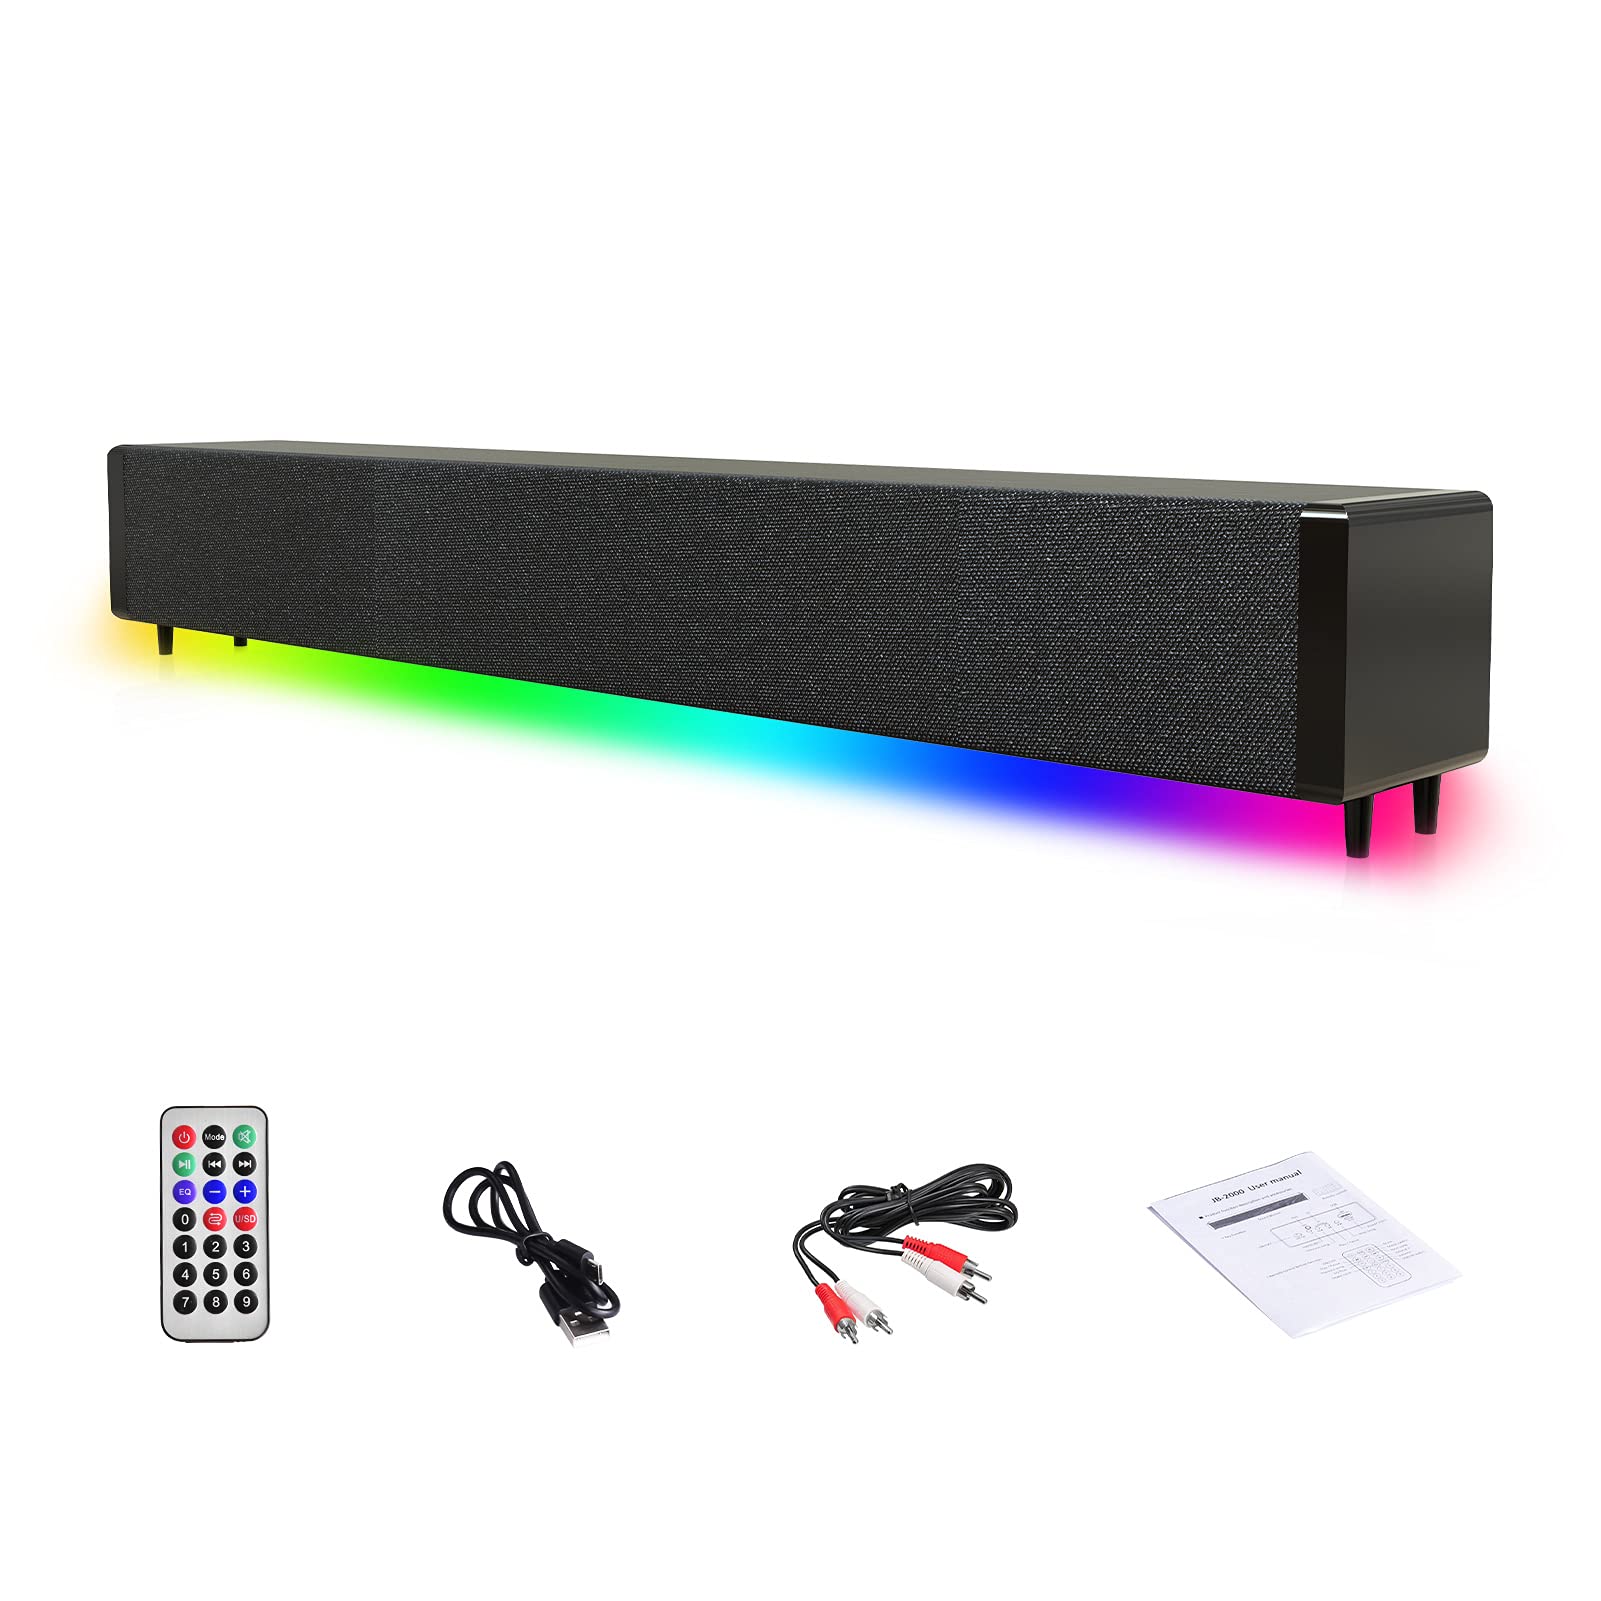 Sound Bar for TV with Built-in Subwoofer & Dynamic Lighting Bar, 17-in Soundbar with Bluetooth/USB/AUX Connection, Adjustable Mini Sound/Audio System for TV Speakers/Home Theater, Gaming - Home Decor Gifts and More